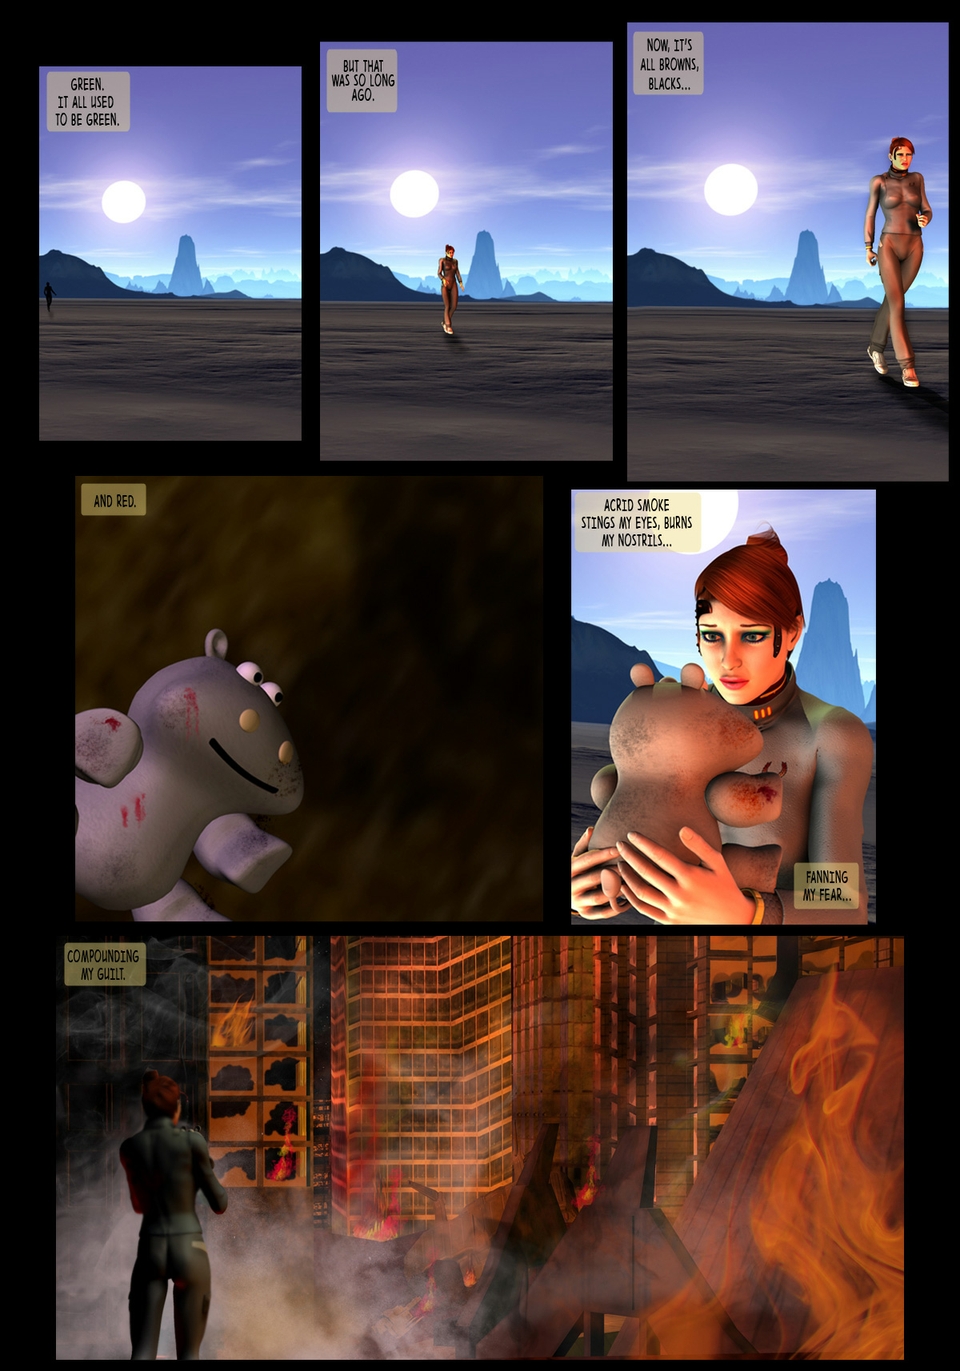 Voyage of the Proken Promise - Issue 1, Page 1